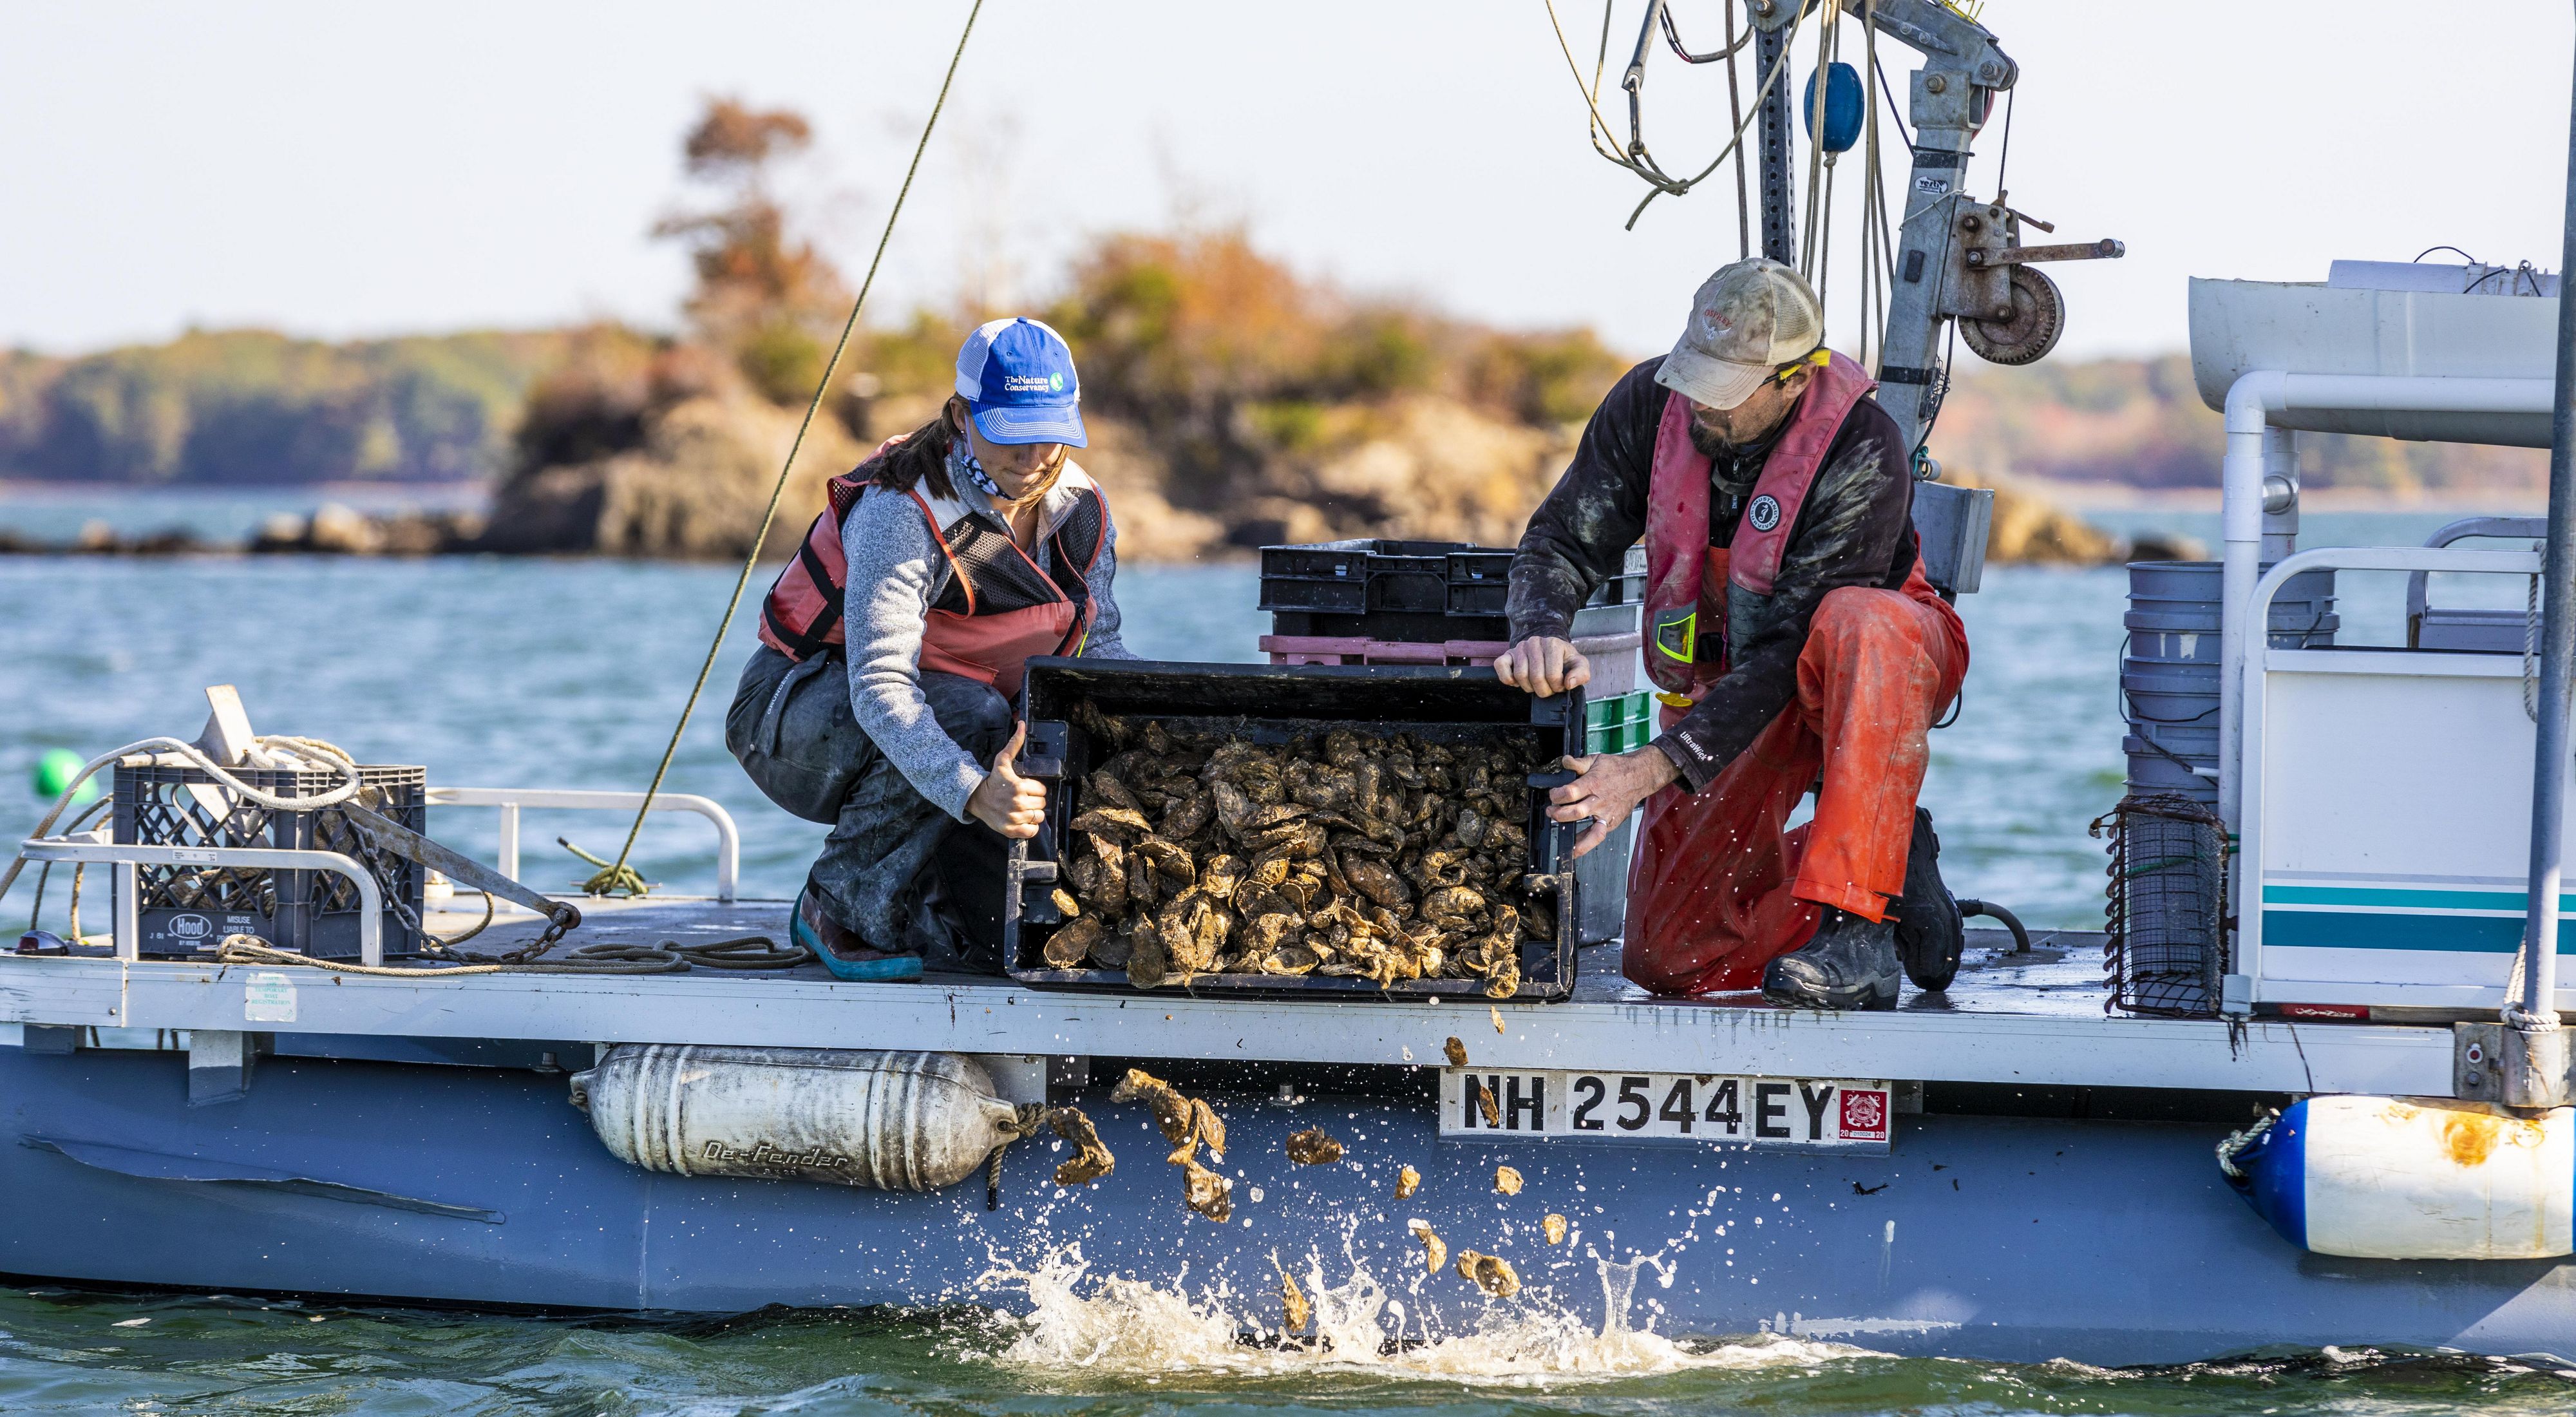 A shellfish grower and TNC staffer on a boat pouring oyster shells into the water.